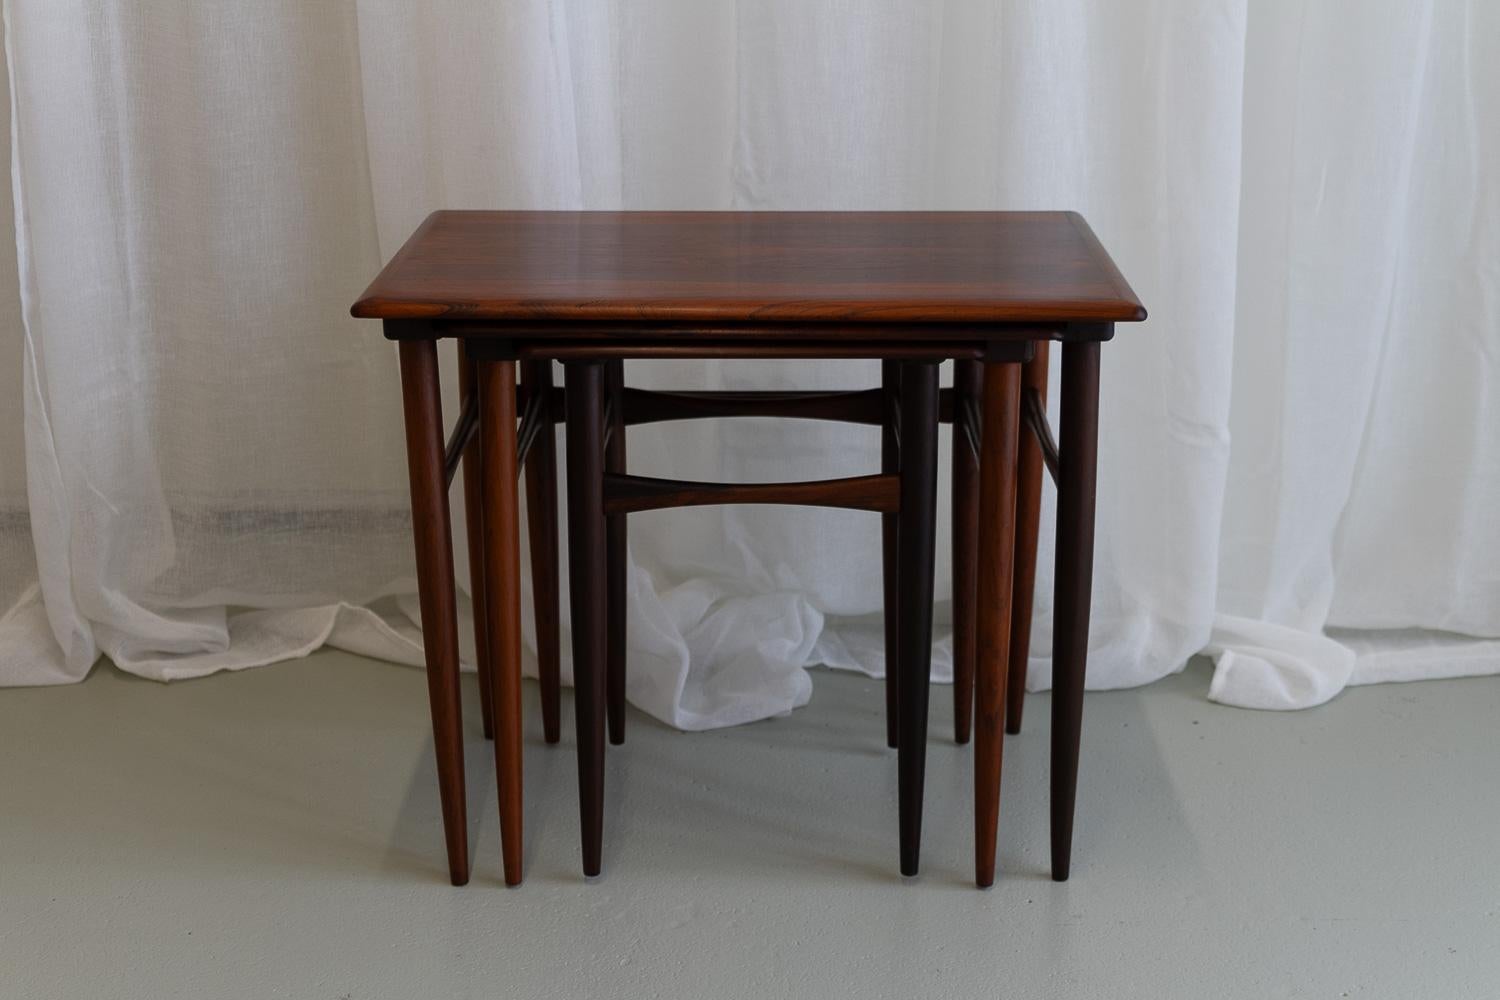 Danish Modern Set of Rosewood Nesting Tables, 1960s.
Set of three Scandinavian Modern Rosewood/Palisander nesting tables with tapered legs and beautiful expressive veneer pattern.
These light and elegant stacking tables are attributed to Poul